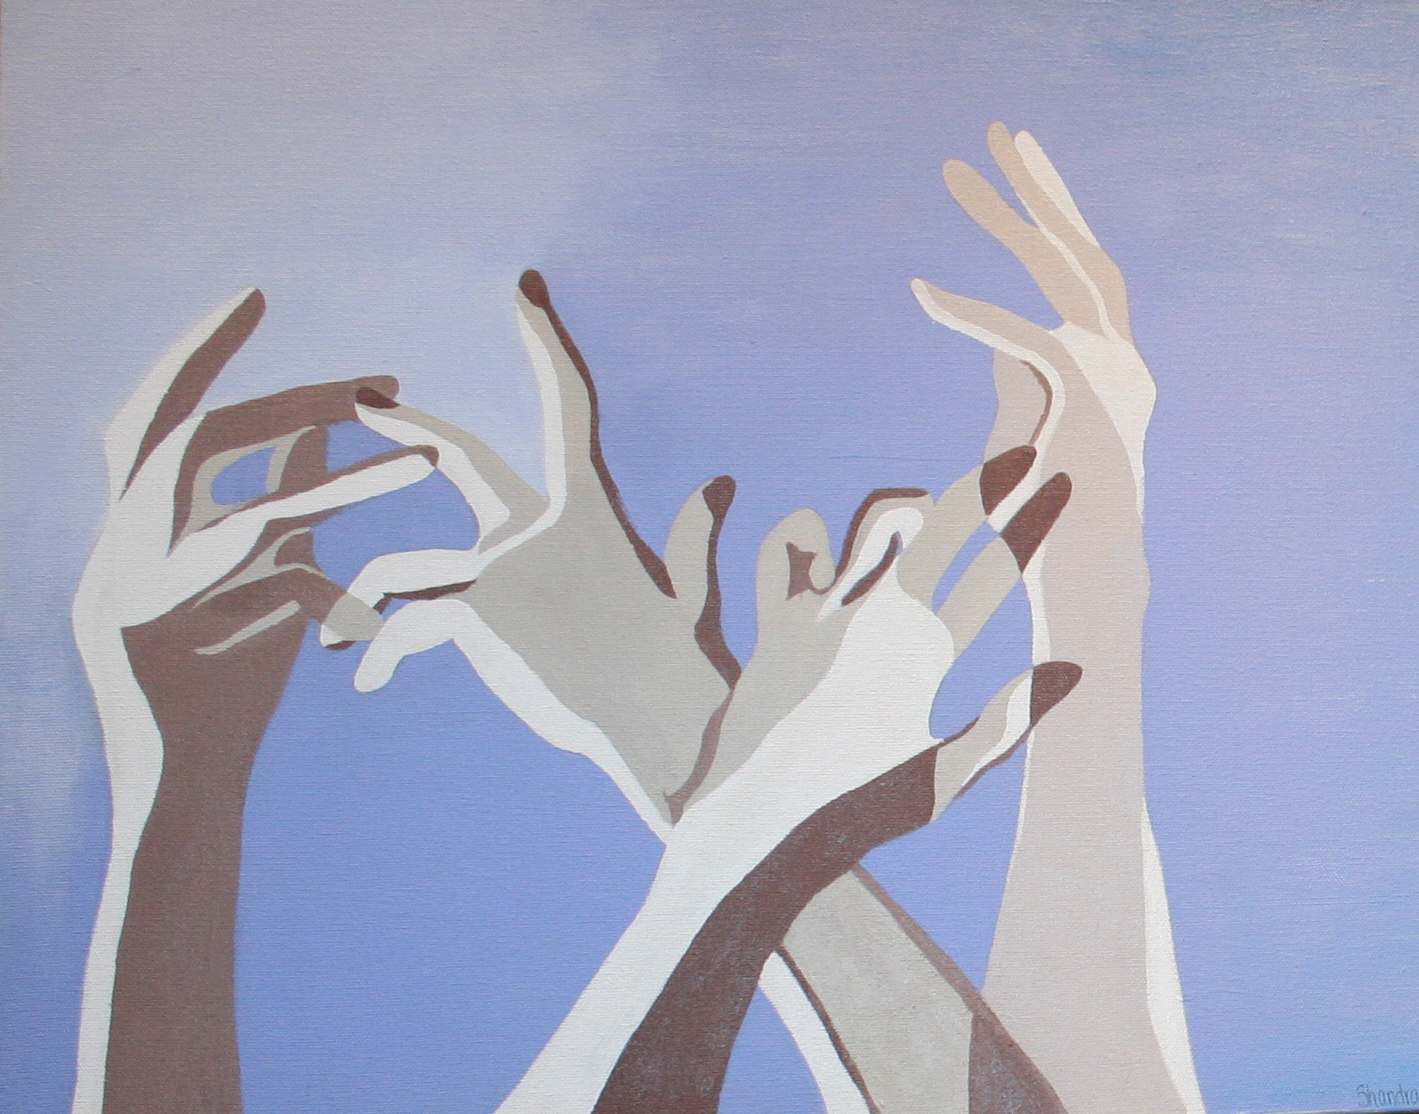 Graphic of several hands reaching upward